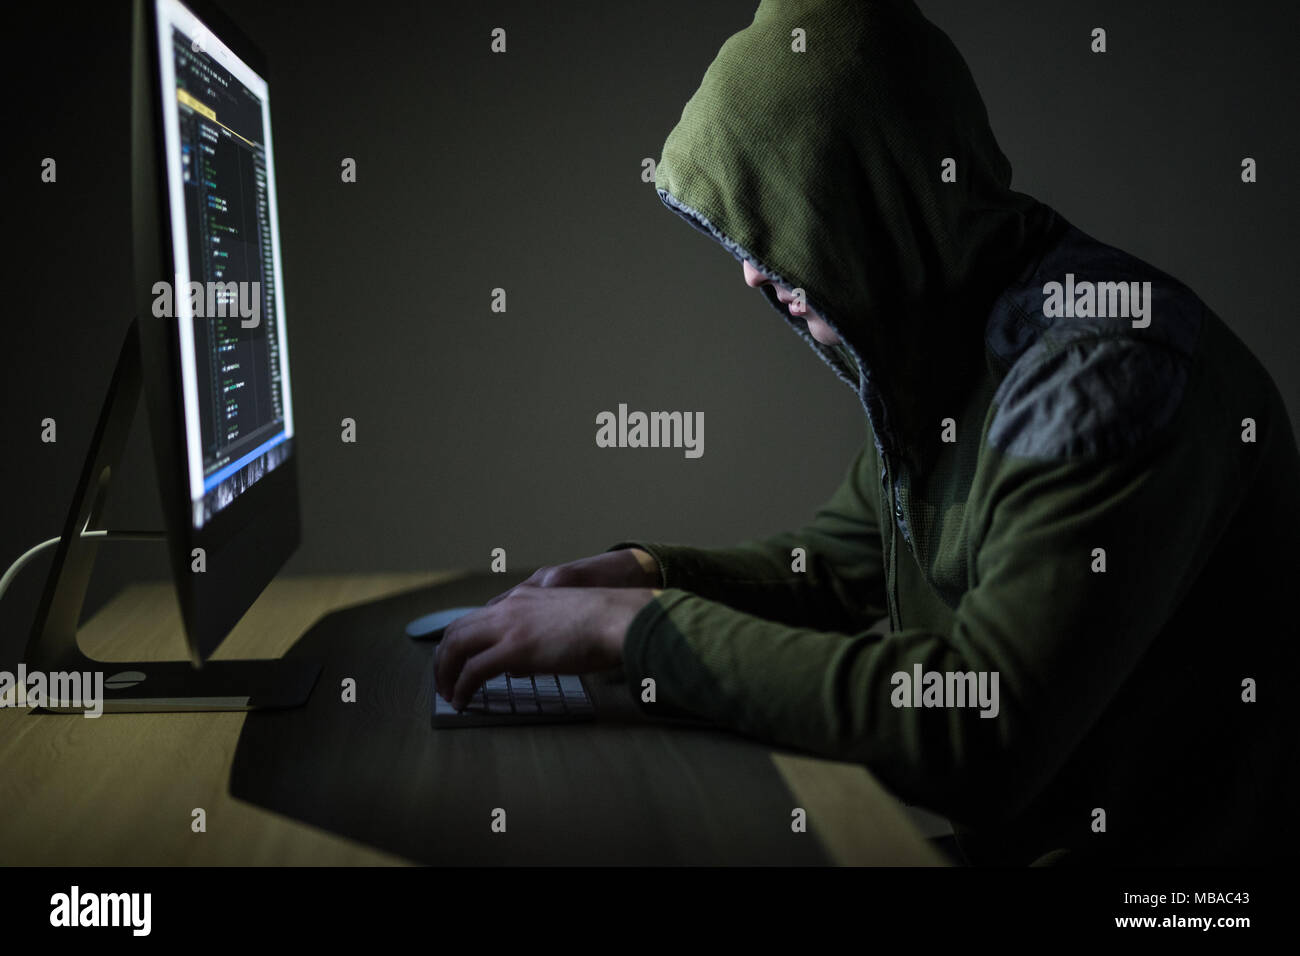 Hooded computer hacker stealing information with pc. Dark background Stock Photo